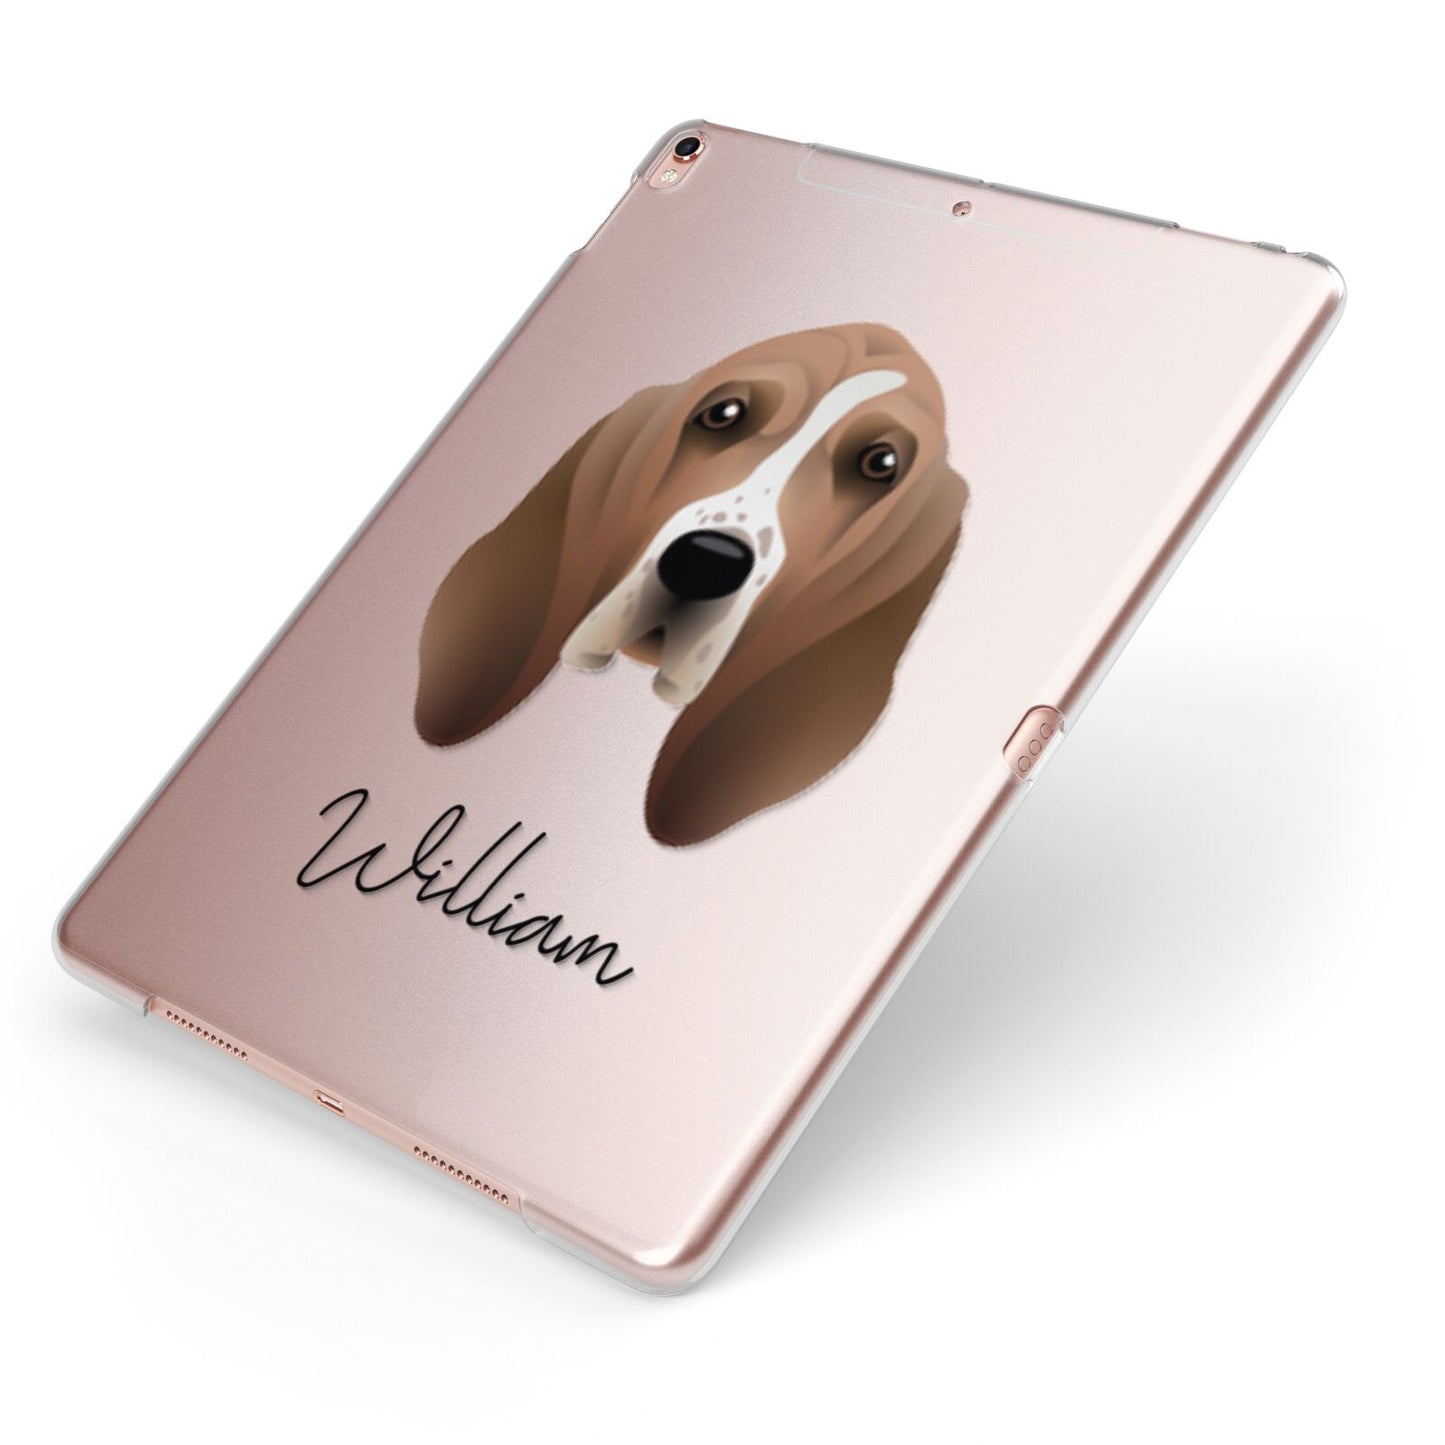 Basset Hound Personalised Apple iPad Case on Rose Gold iPad Side View